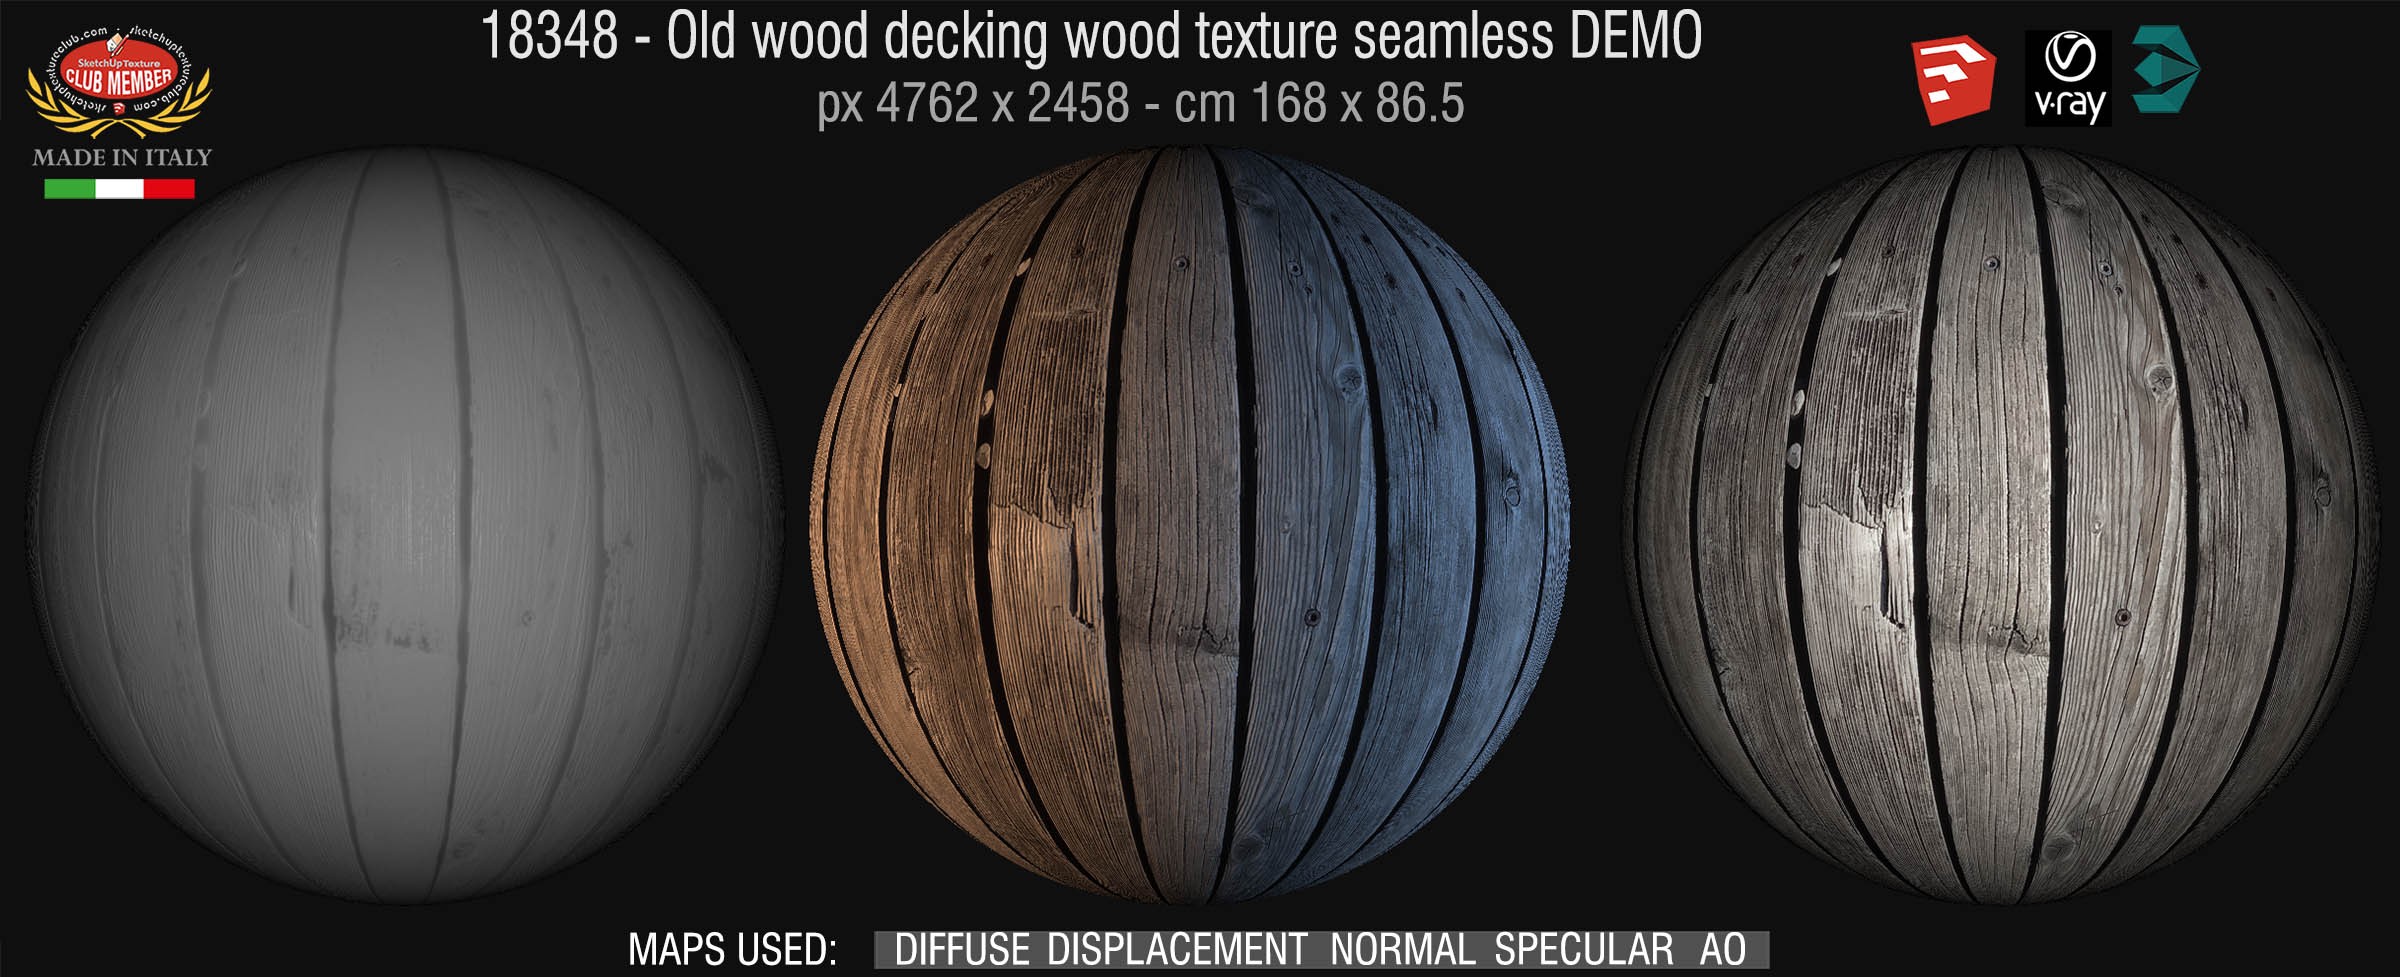 18348  HR old wood decking texture seamless + maps DEMO